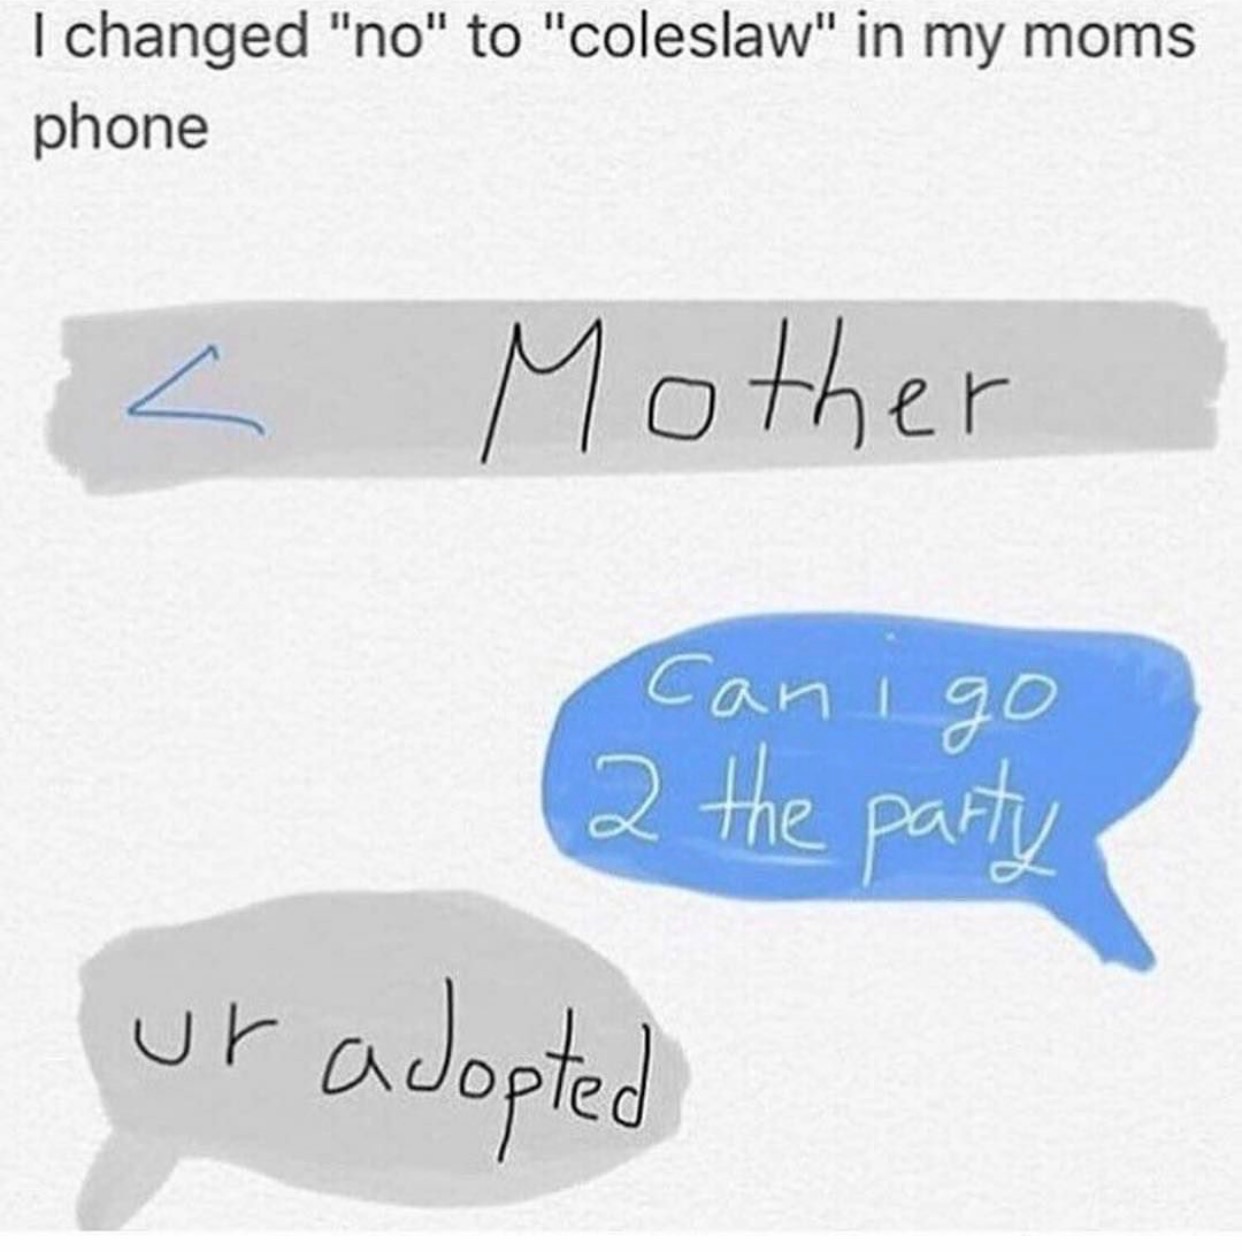 handwriting - I changed "no" to "coleslaw" in my moms phone